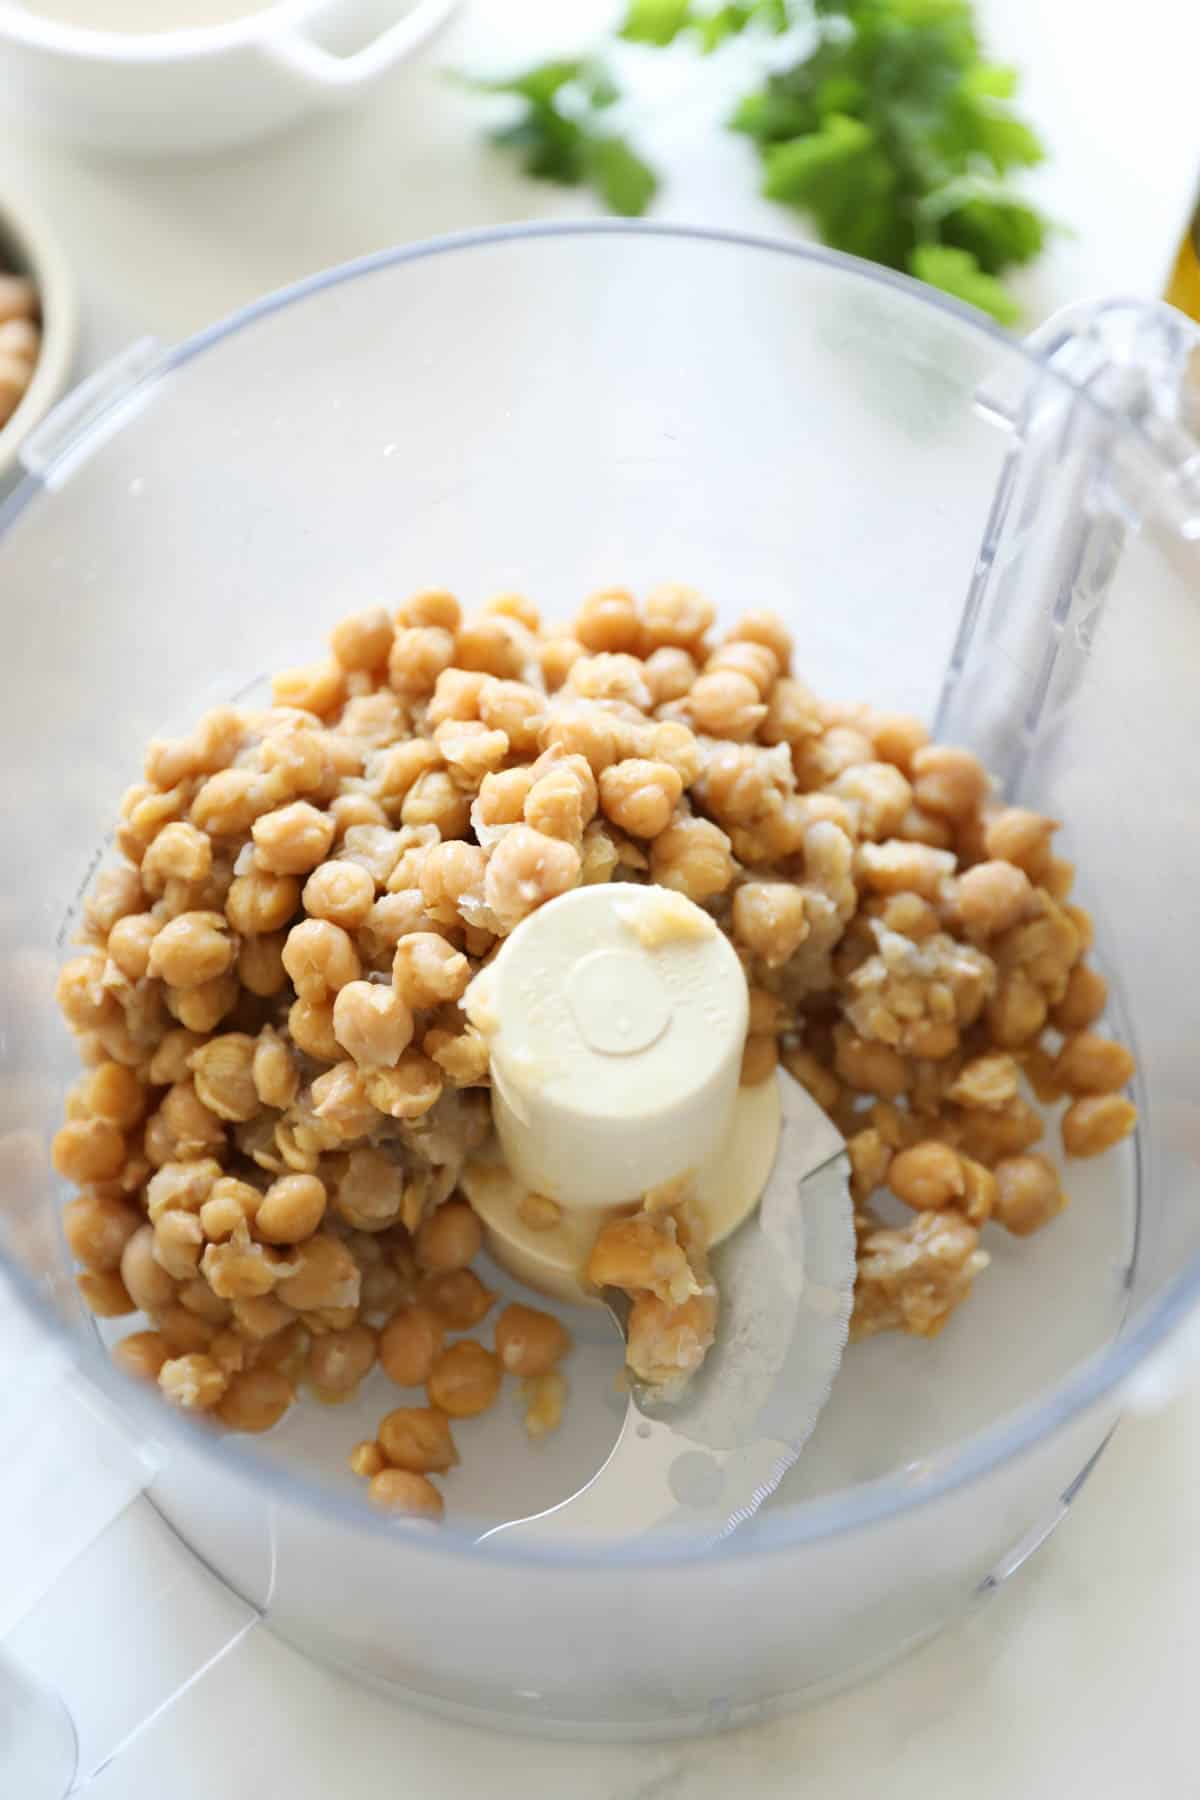 Chickpeas soften with skins peeling in a food processor